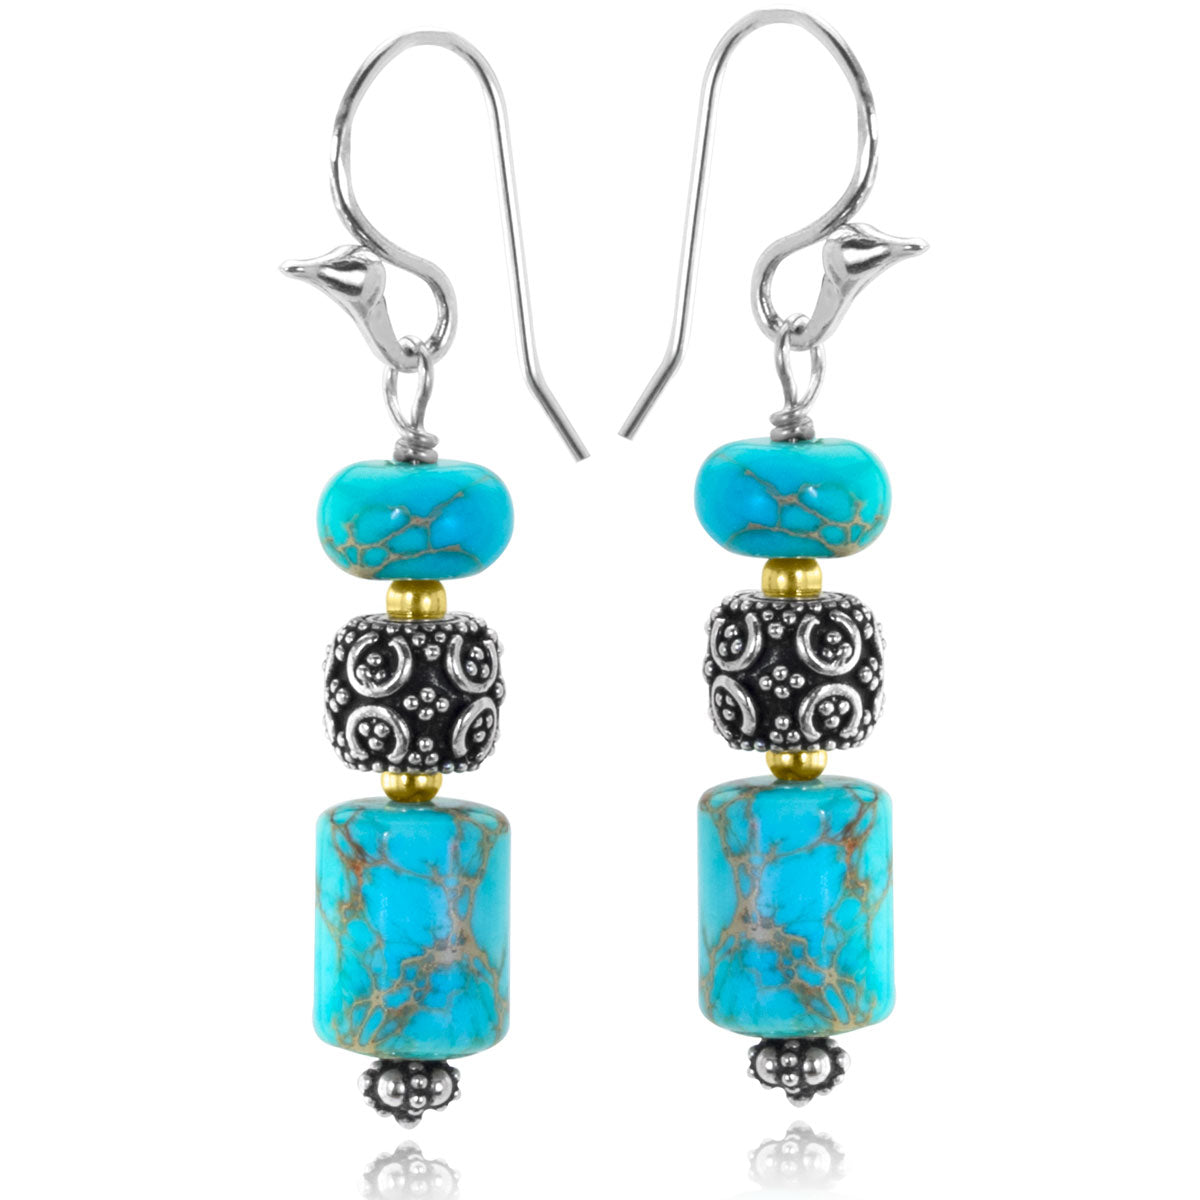 The Goddess Collection Turquoise Earrings